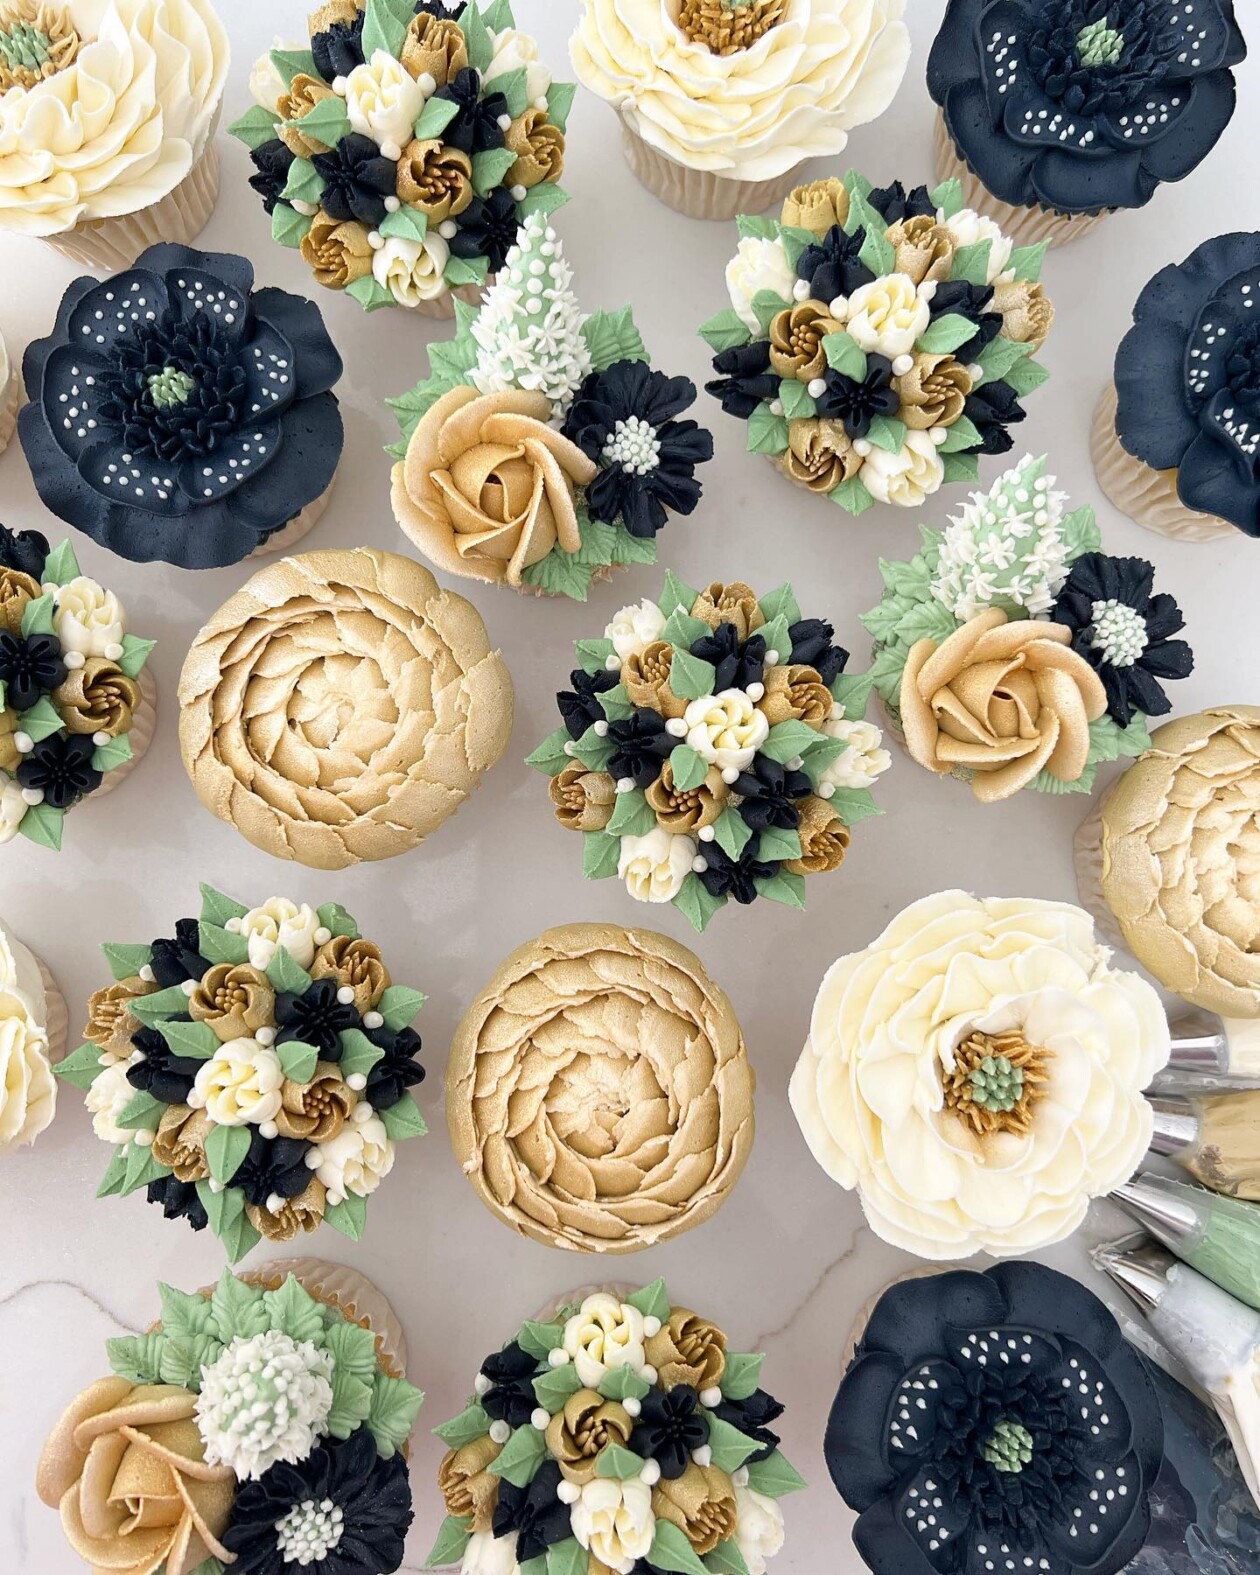 Gorgeous Cupcakes Decorated With Buttercream Flowers And Succulents By Kerry's Bouqcakes (4)